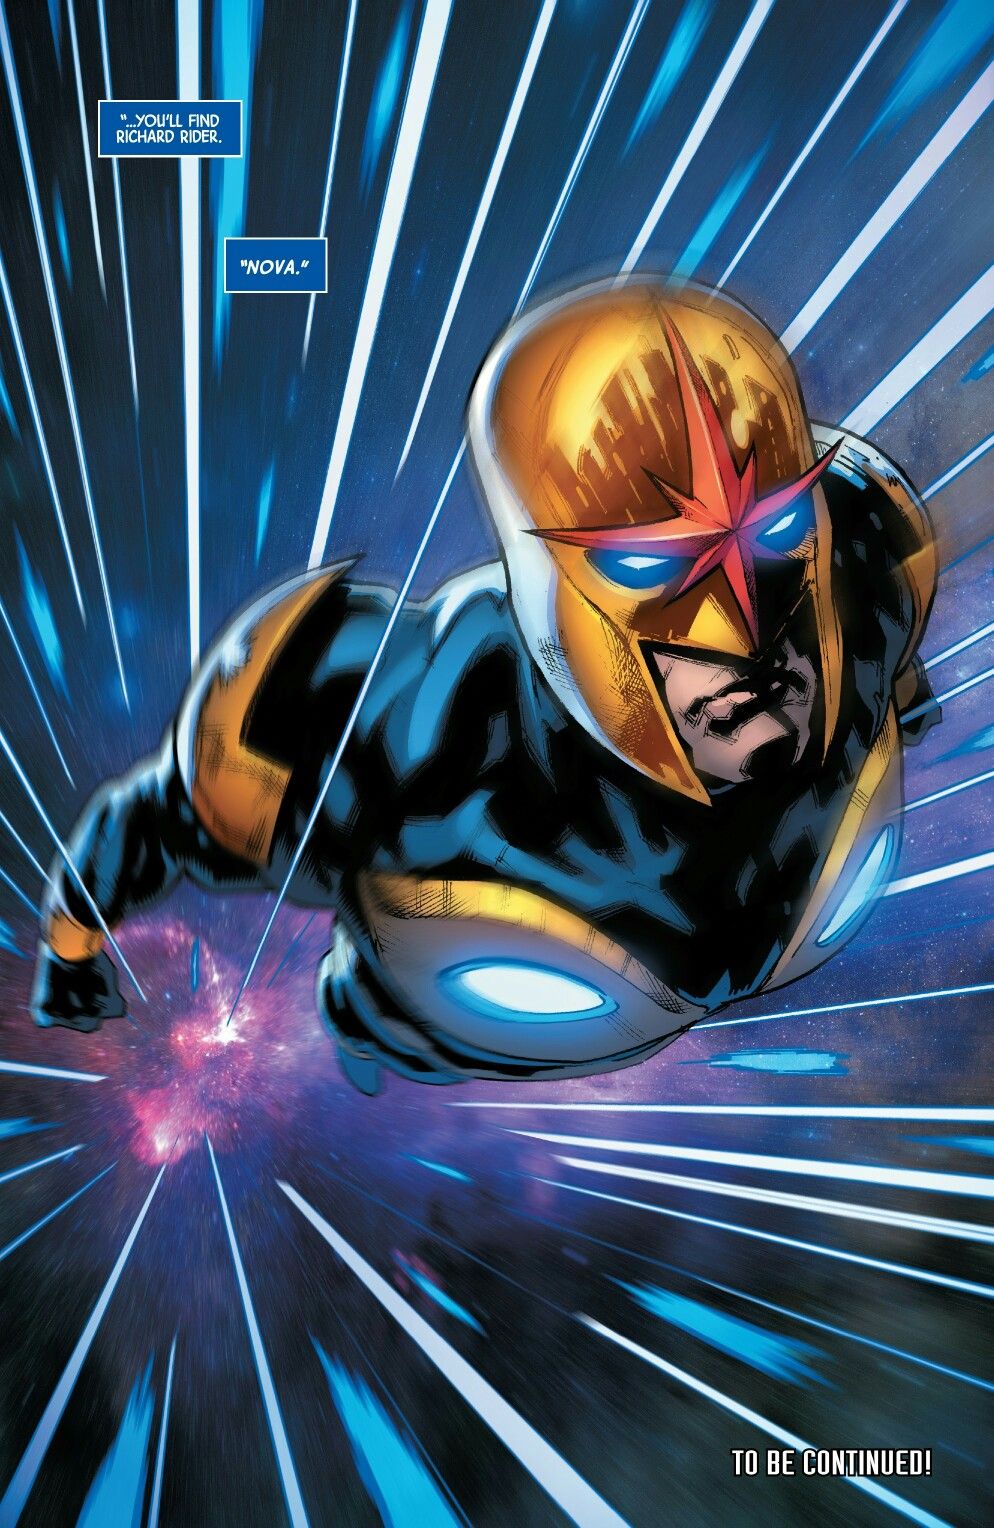 Richard Rider as Nova in Marvel Comics. Marvel Studios are developing a Nova project for the MCU